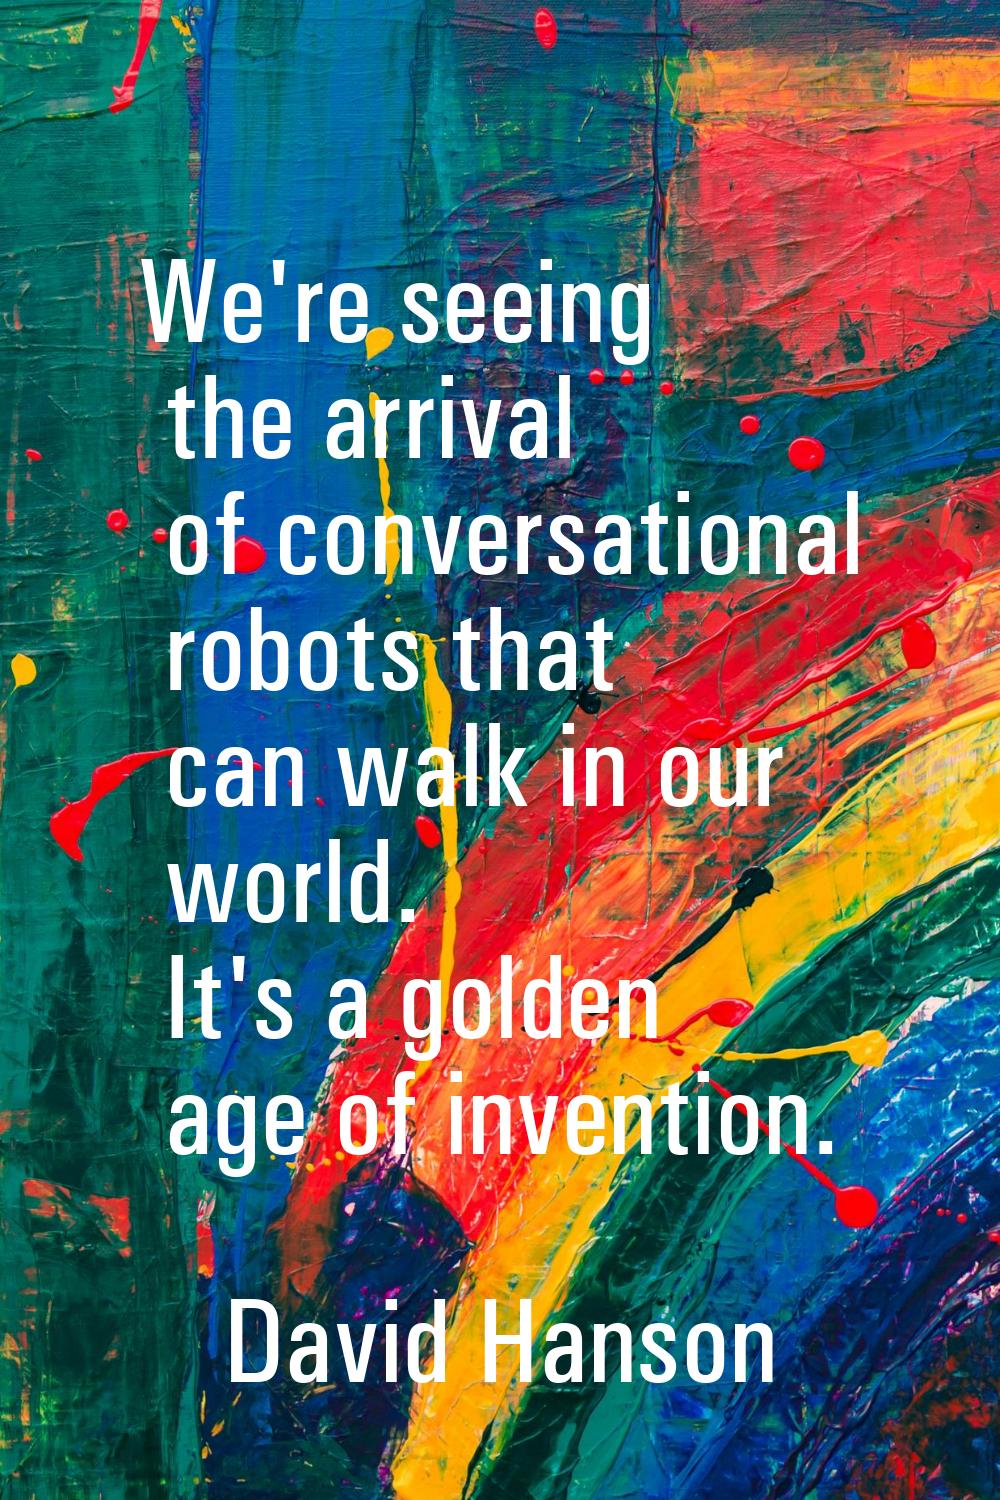 We're seeing the arrival of conversational robots that can walk in our world. It's a golden age of 